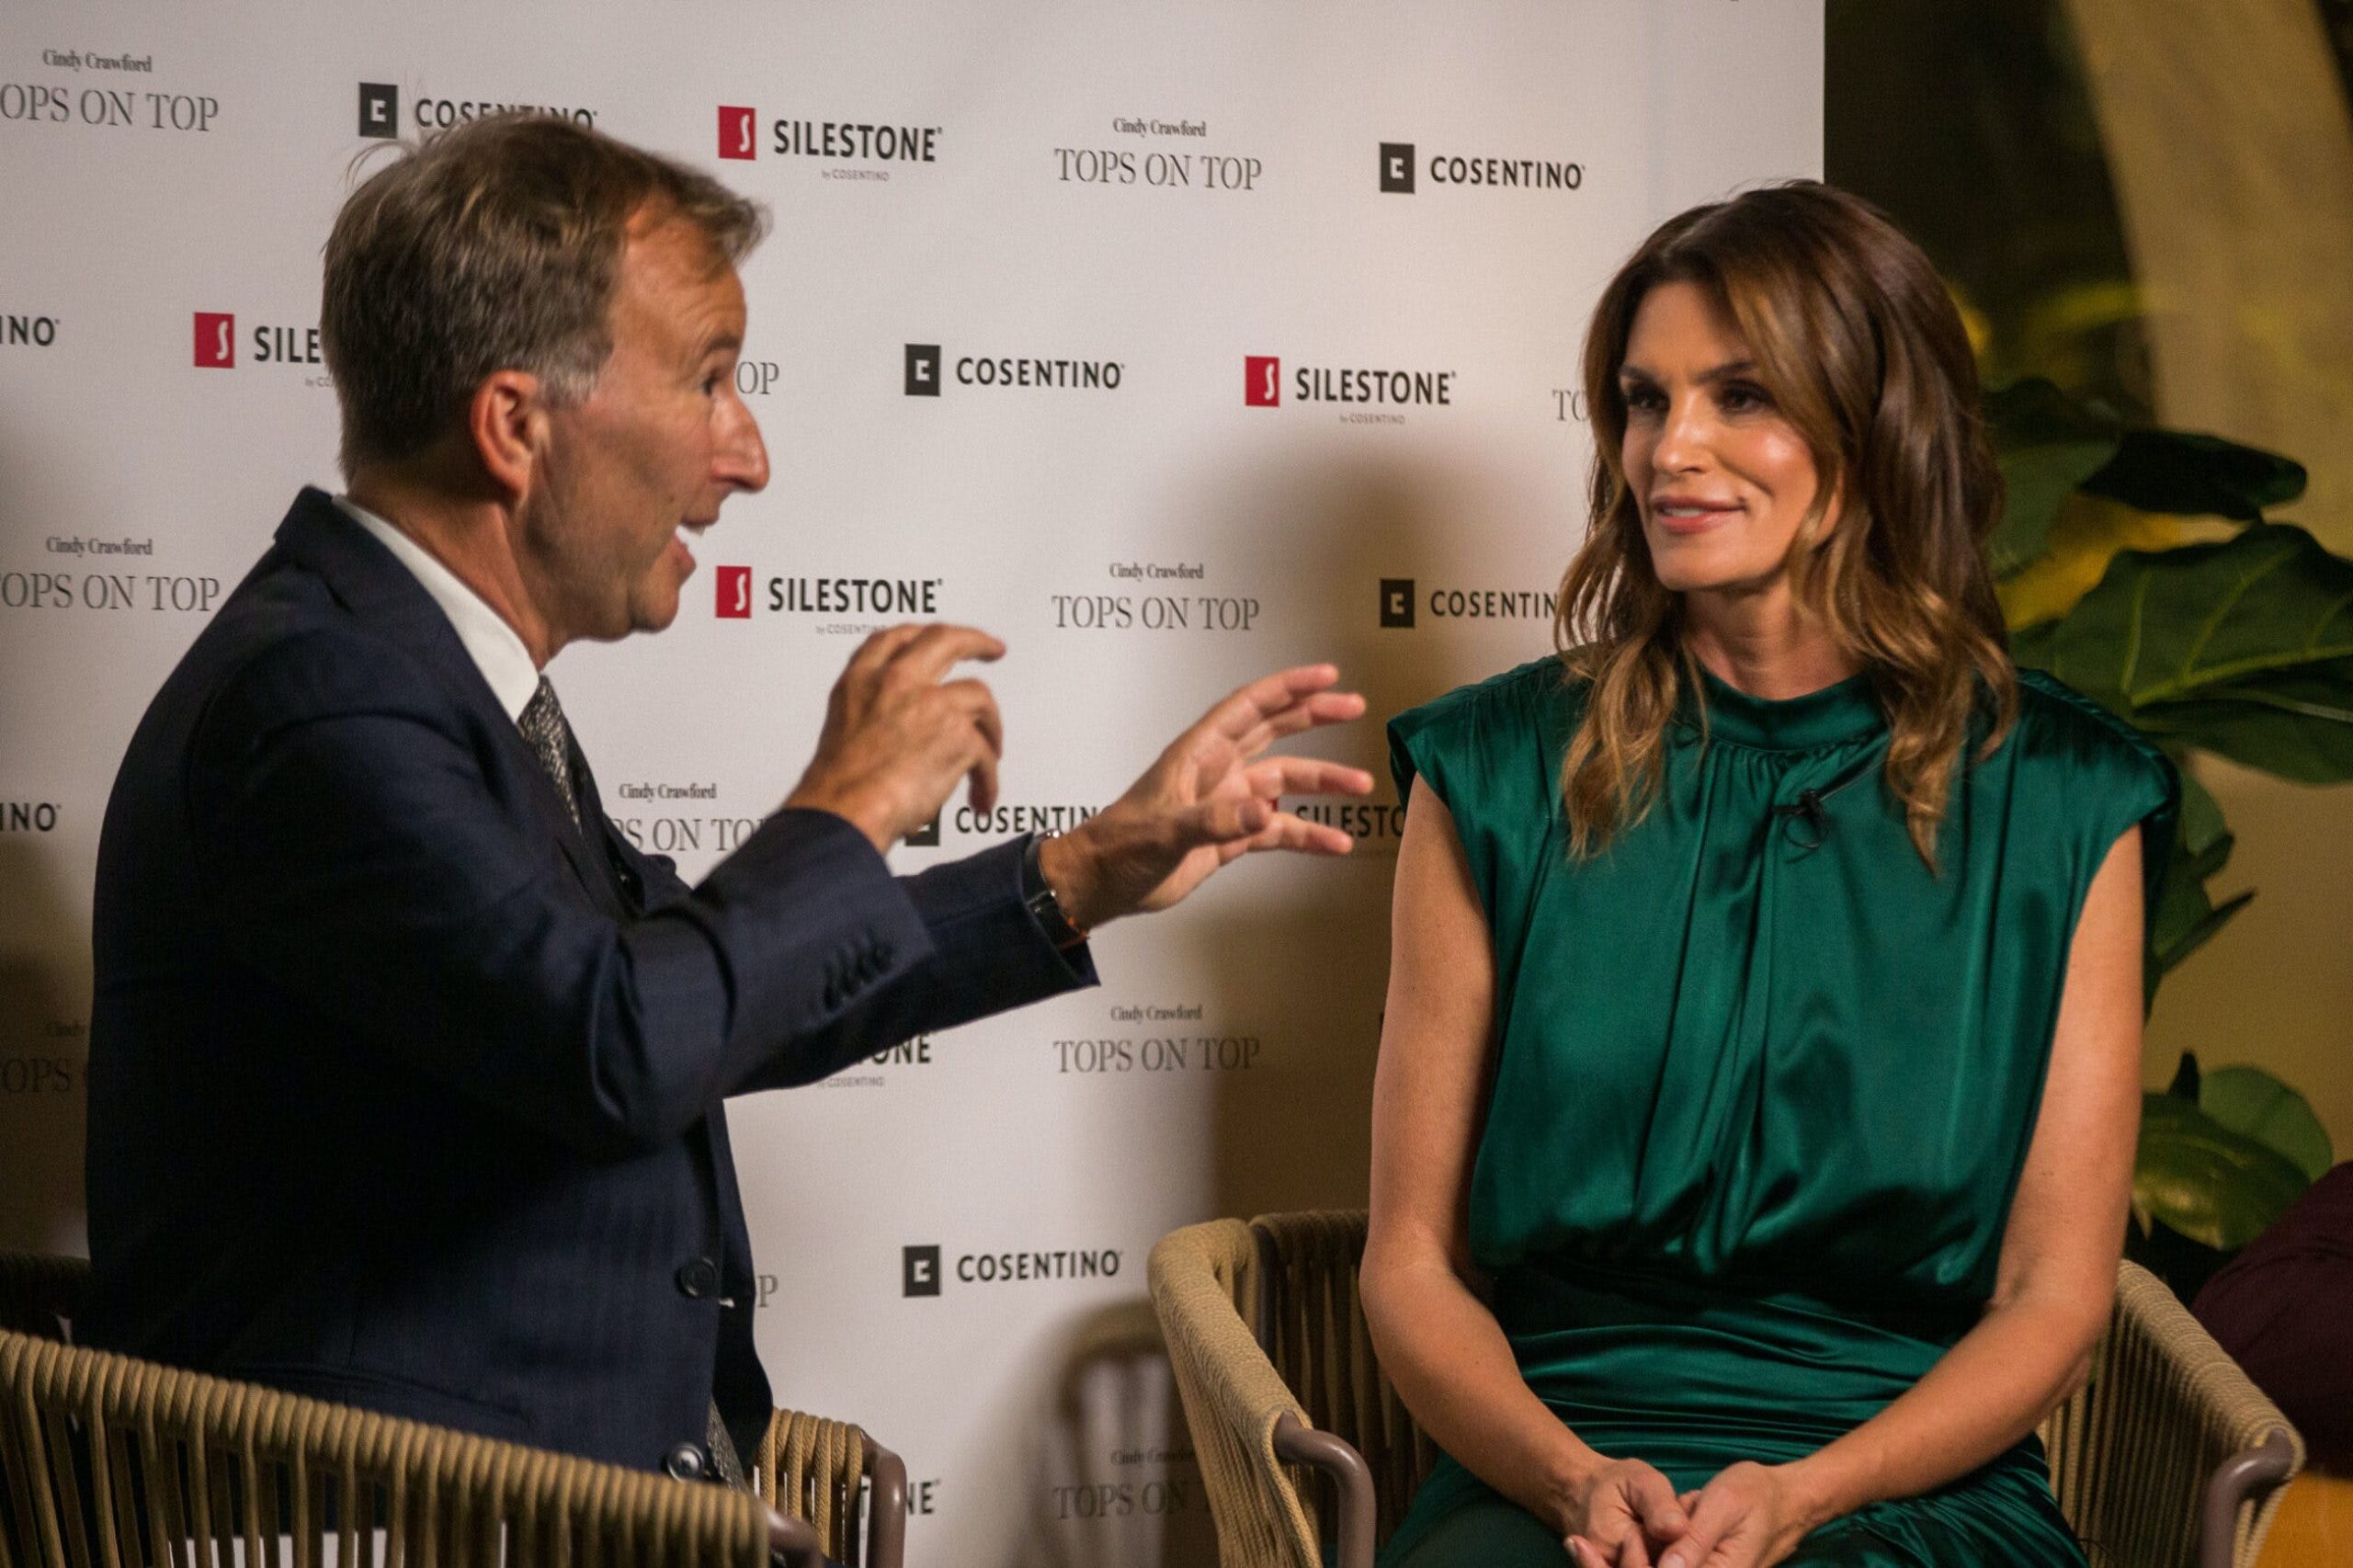 Image 36 of Tony Chambers y Cindy Crawford Silestone Londres 3 scaled in Silestone® Presents its New "Tops on Top 2019" Campaign Featuring Cindy Crawford - Cosentino